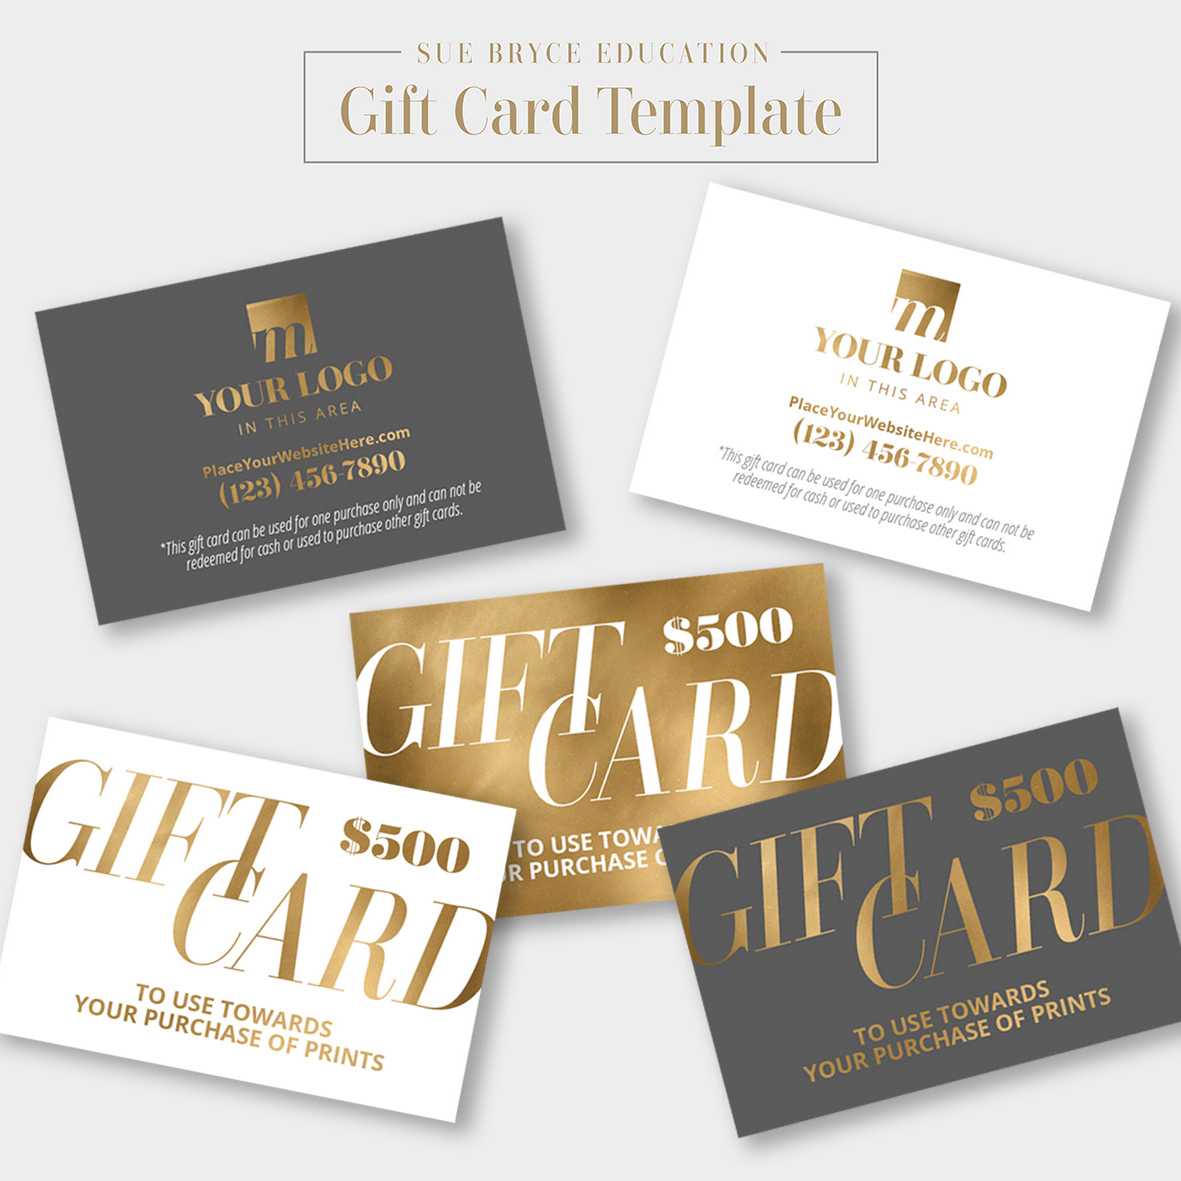 Gift Certificate Templates Indesign Illustrator Gift Coupon For Gift Card Template Illustrator